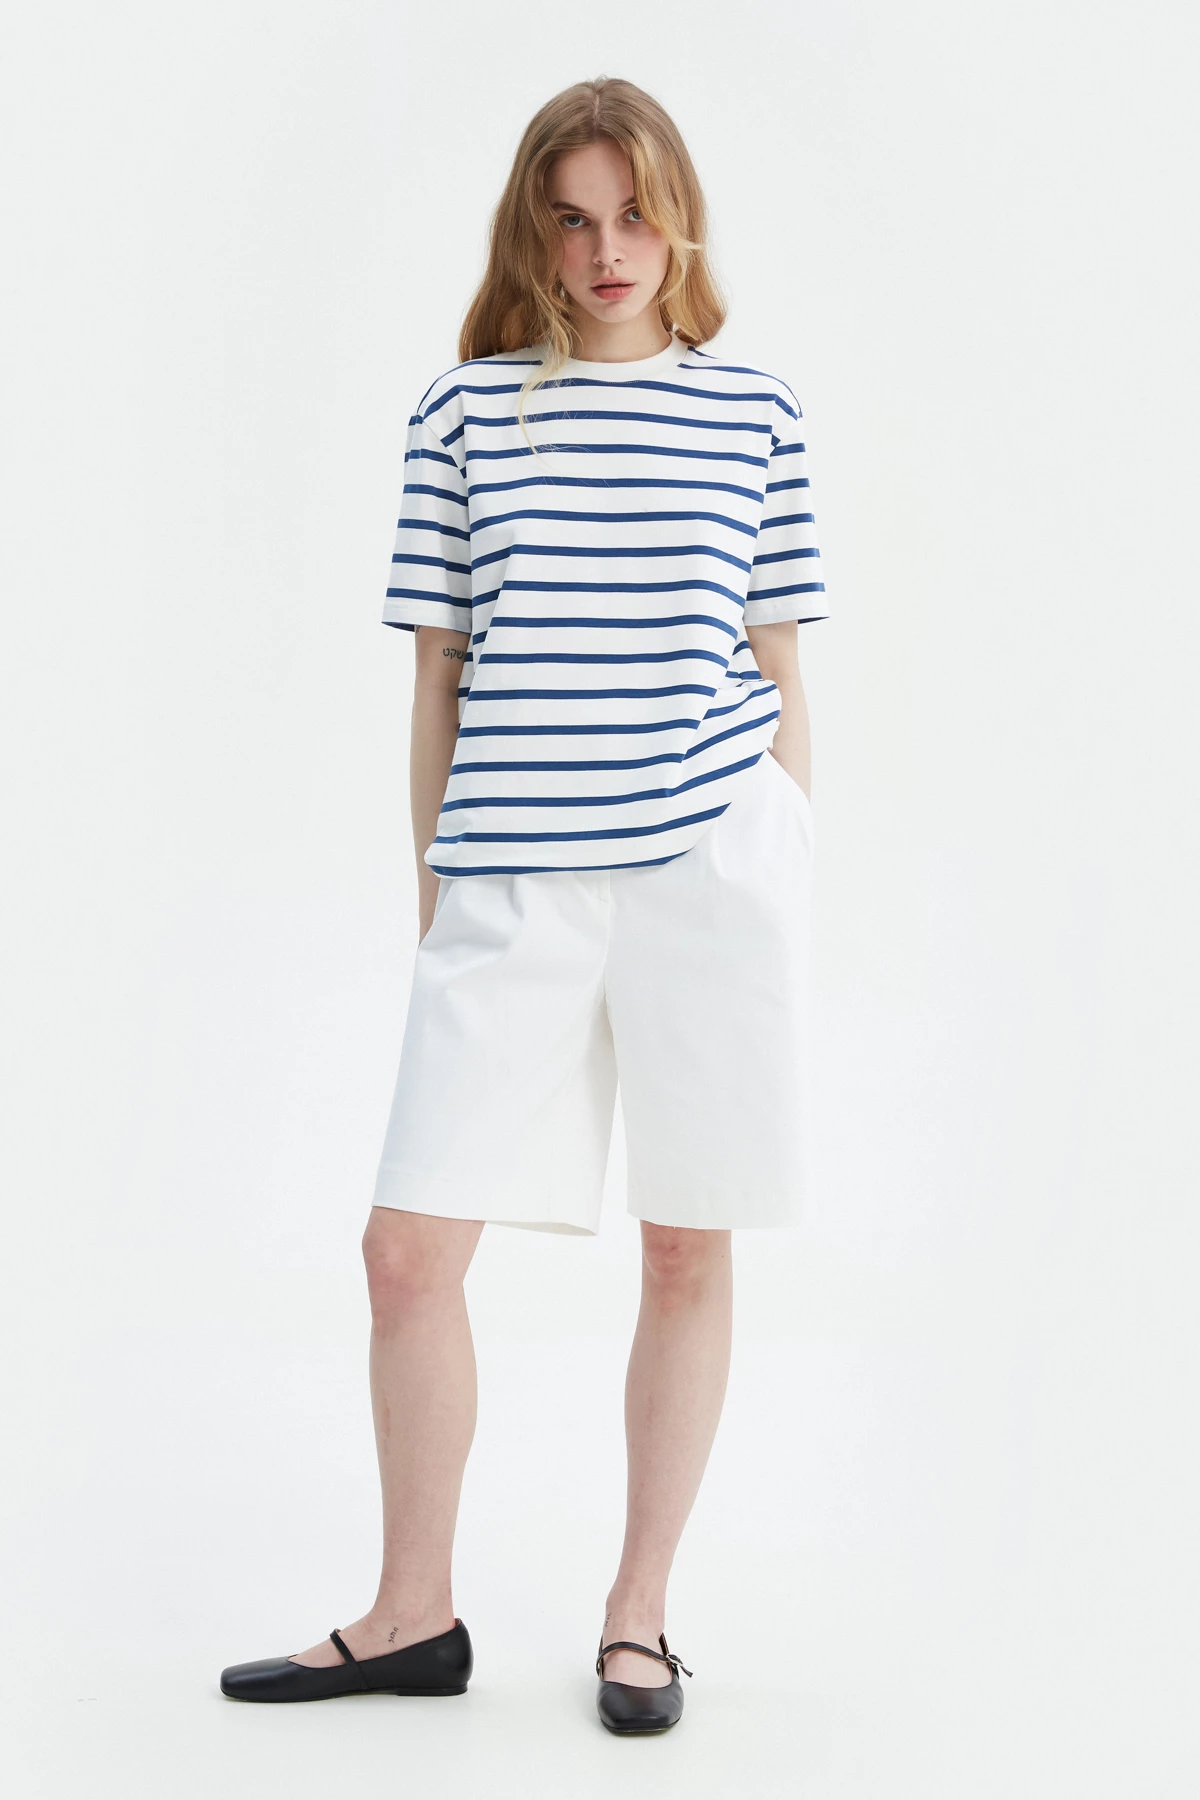 Striped white and blue cotton T-shirt, photo 2